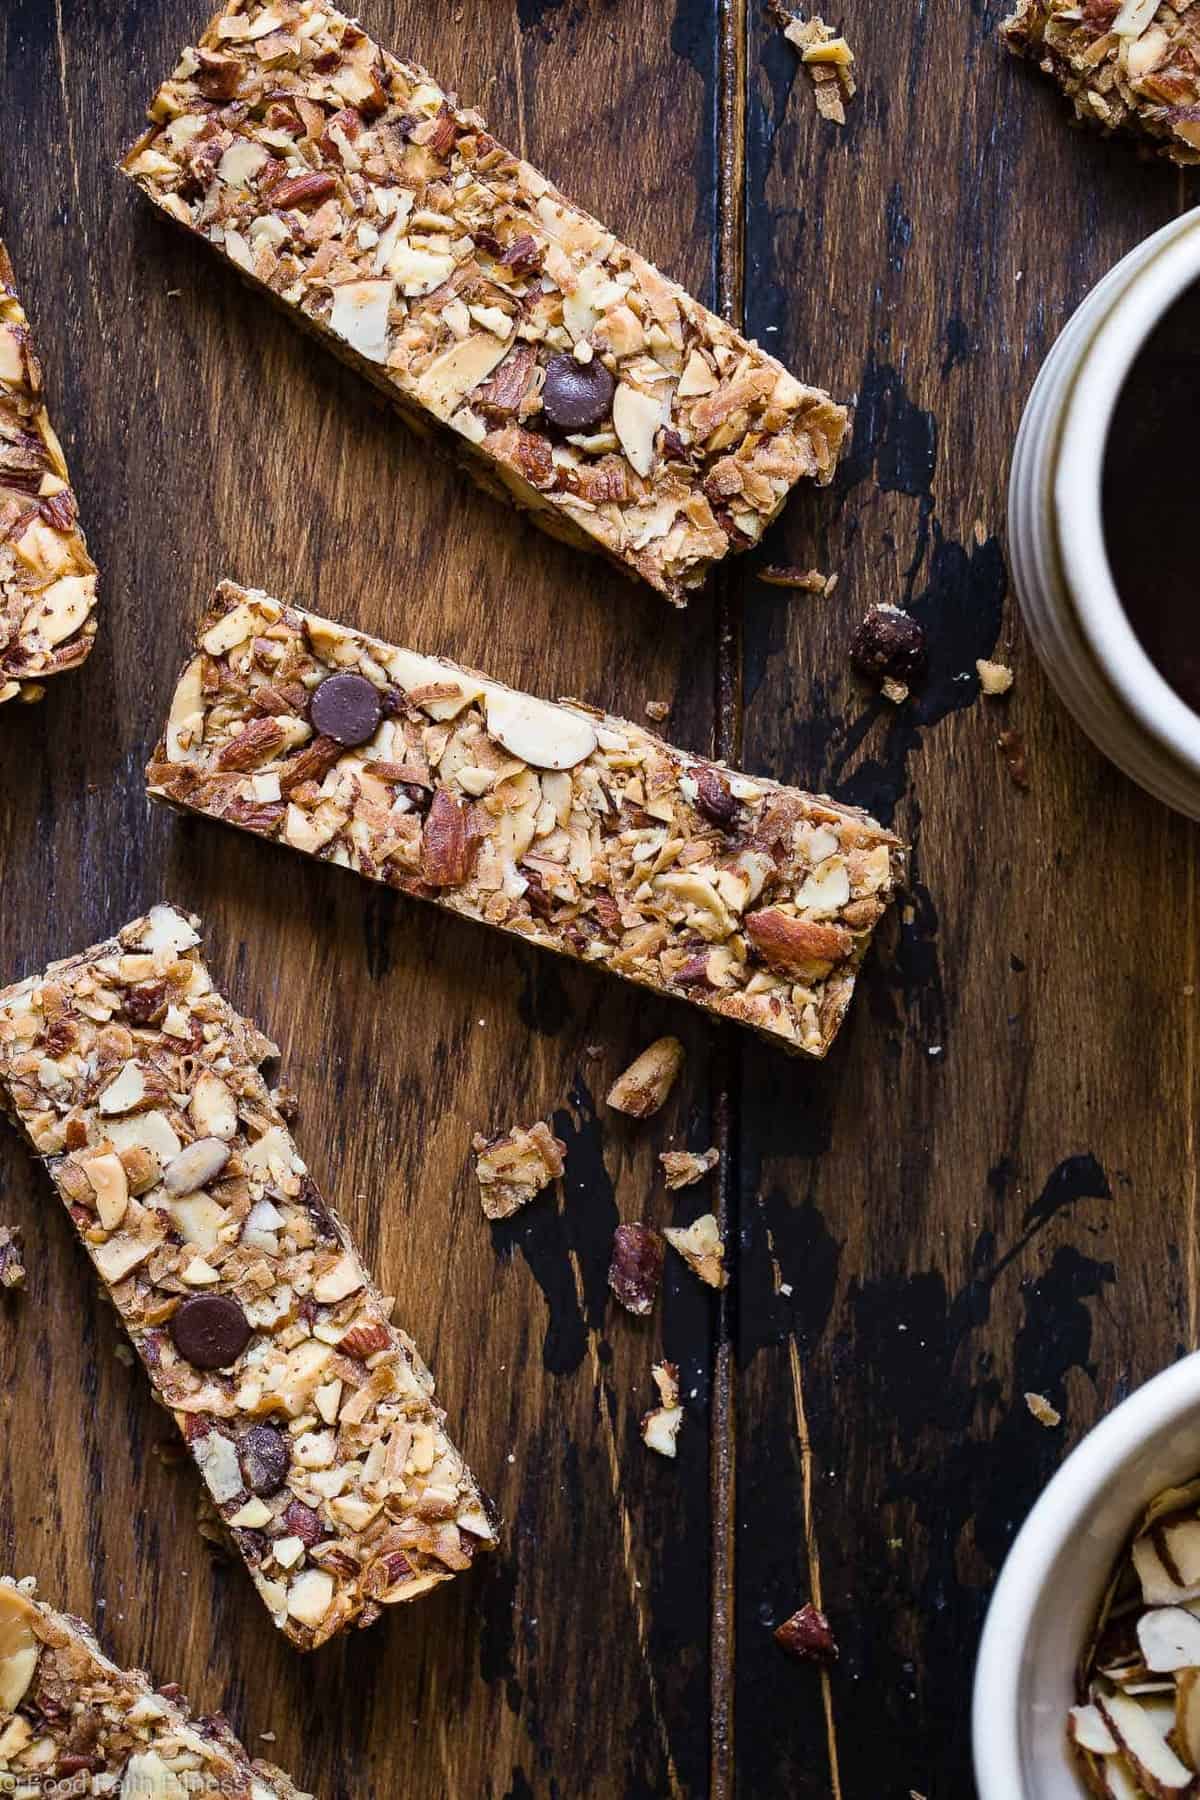 Sugar Free Keto Almond Joy Granola Bars - This low carb granola bars recipe is only 7 simple ingredients and tastes like an Almond Joy! Kids or adults will LOVE these and they're portable and freeze great too! | #Foodfaithfitness | #Keto #Glutenfree #Paleo #Dairyfree #Sugarfree